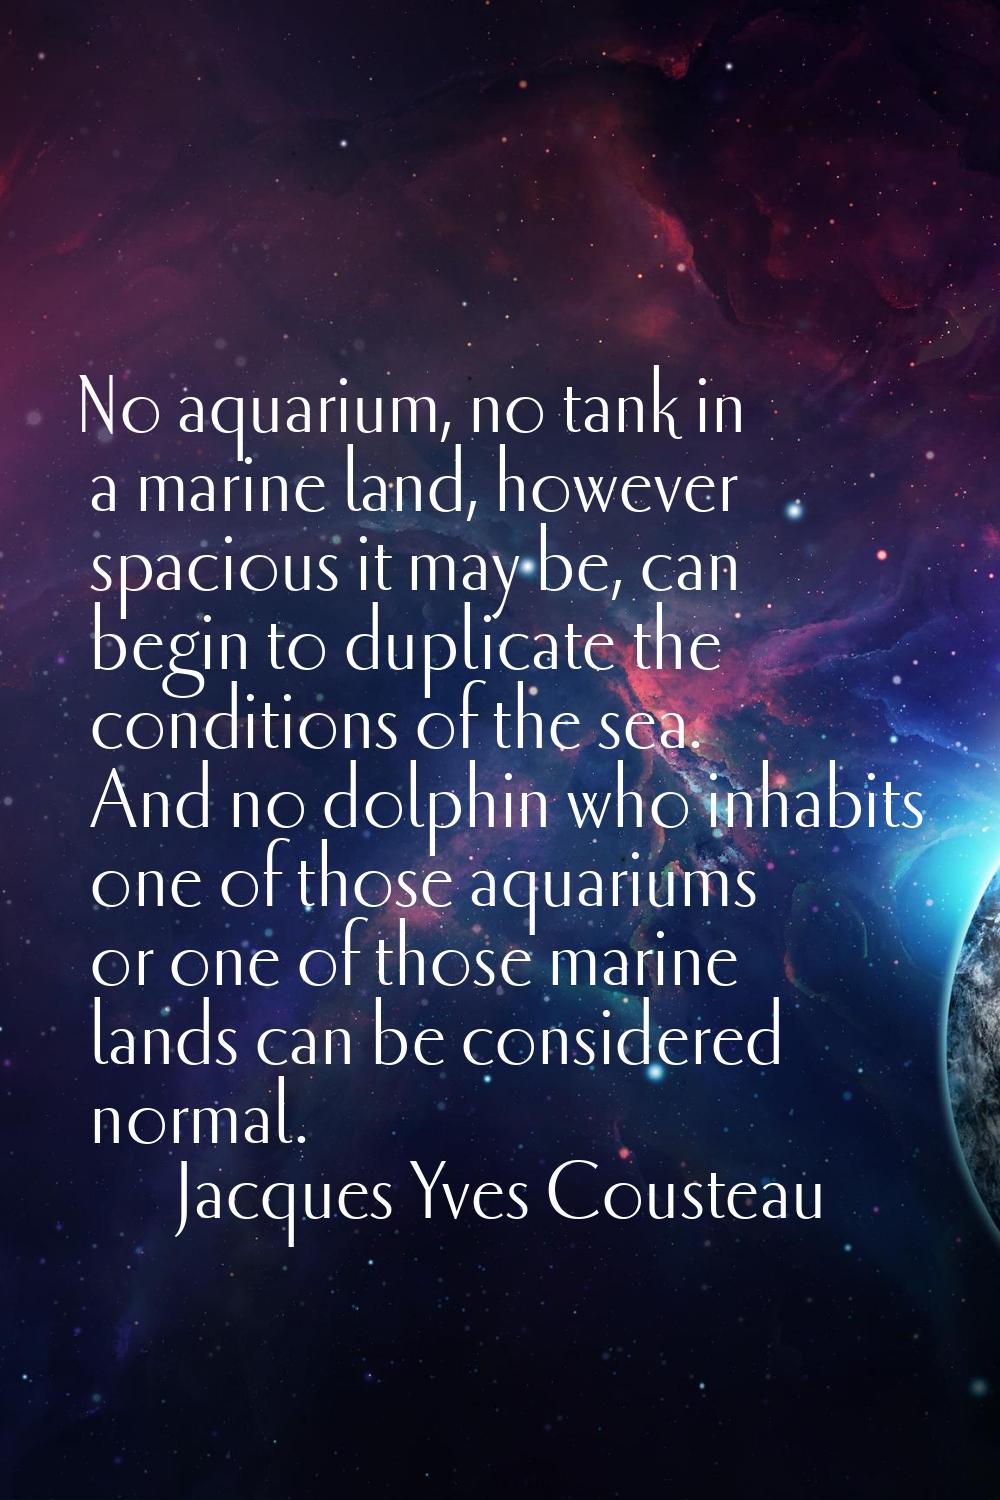 No aquarium, no tank in a marine land, however spacious it may be, can begin to duplicate the condi